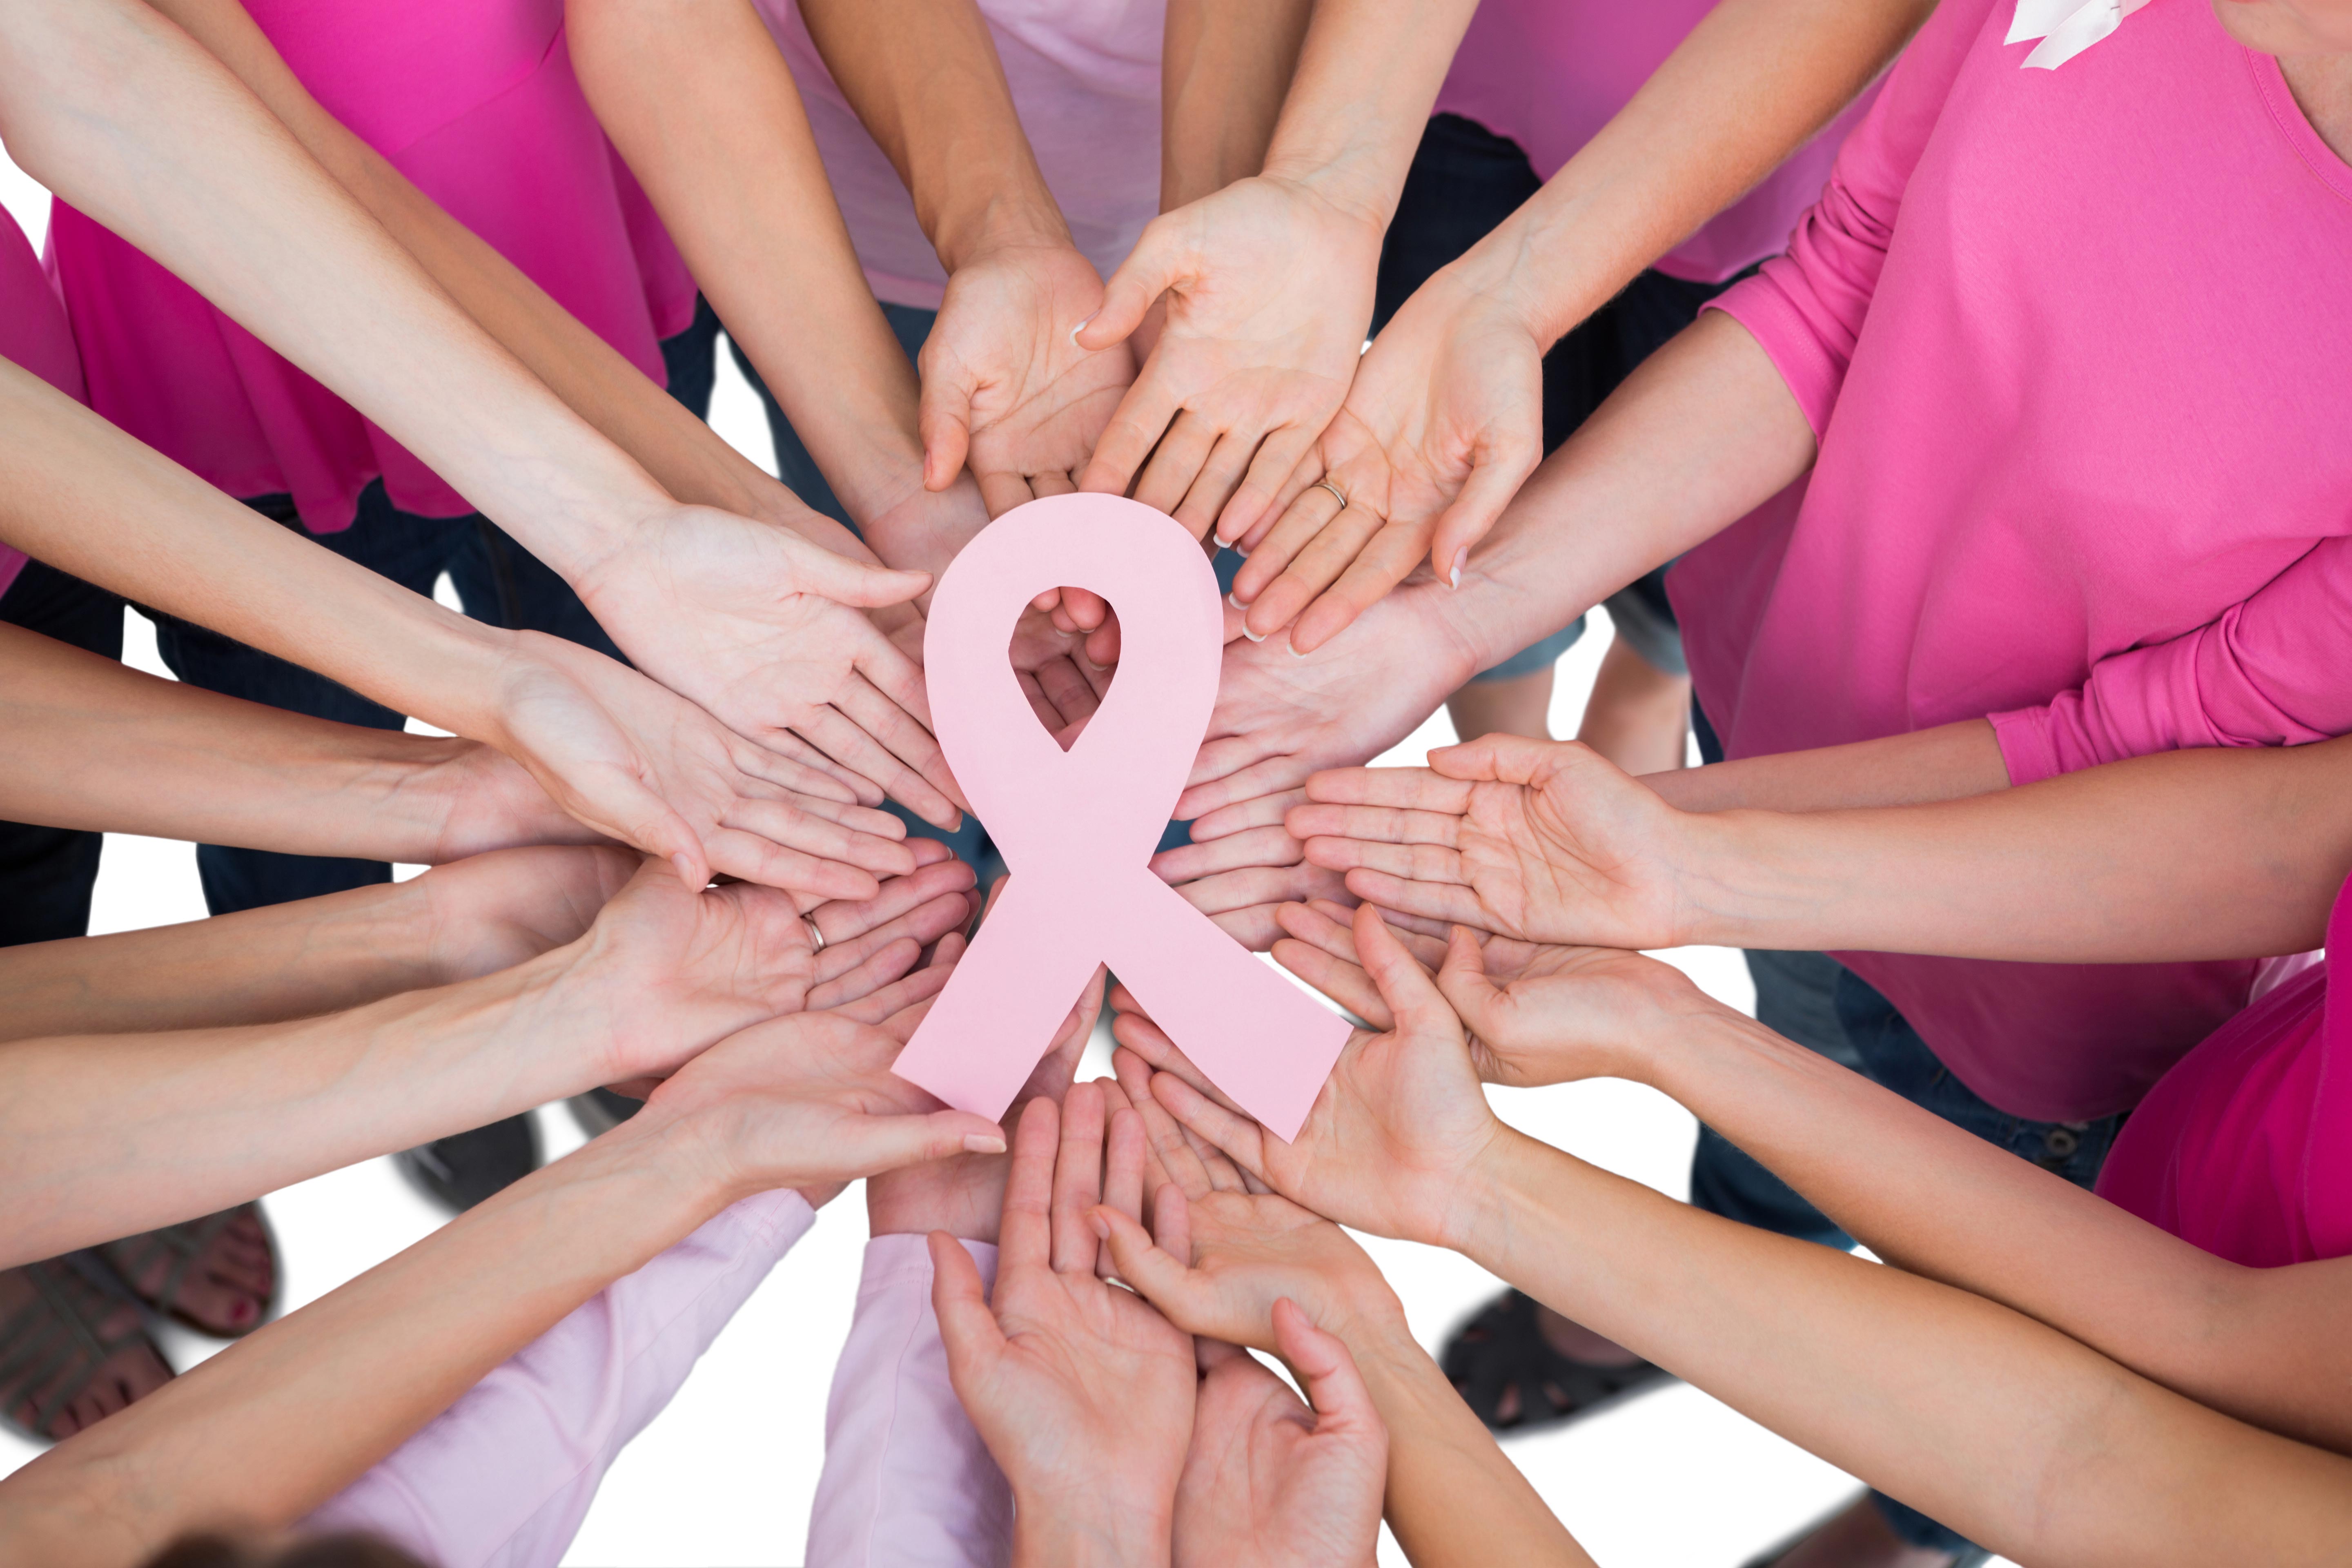 Breast cancer, what to look out for